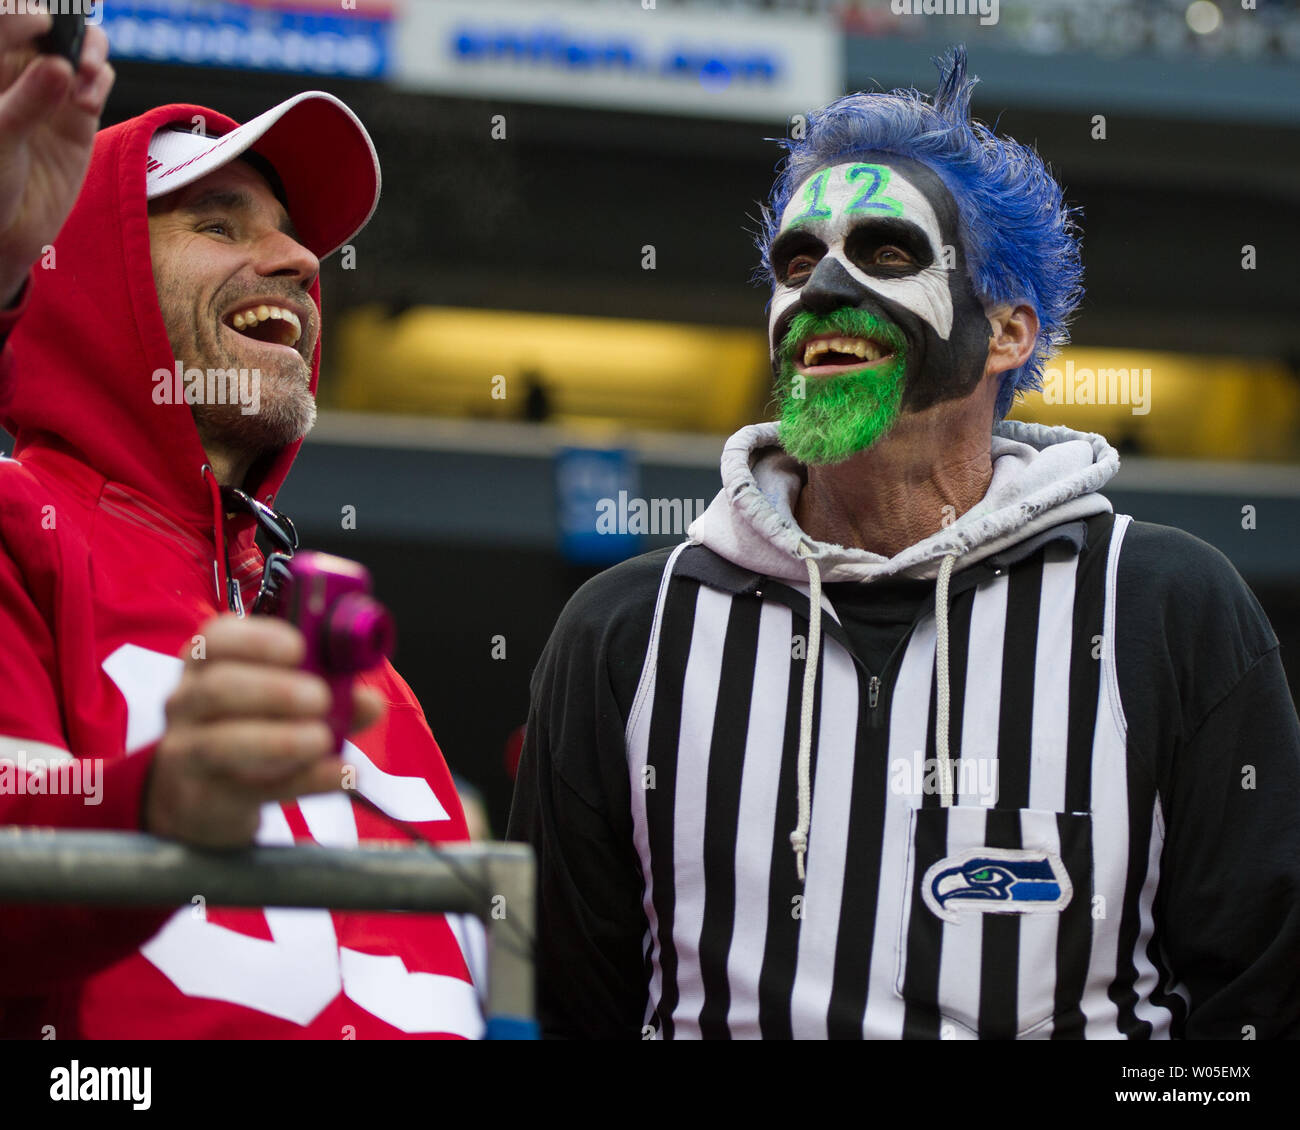 San Francisco 49ers fan John Boulos wears a cheese grater on his hat as he  watches players warm up before an NFC divisional playoff NFL football game  between the San Francisco 49ers